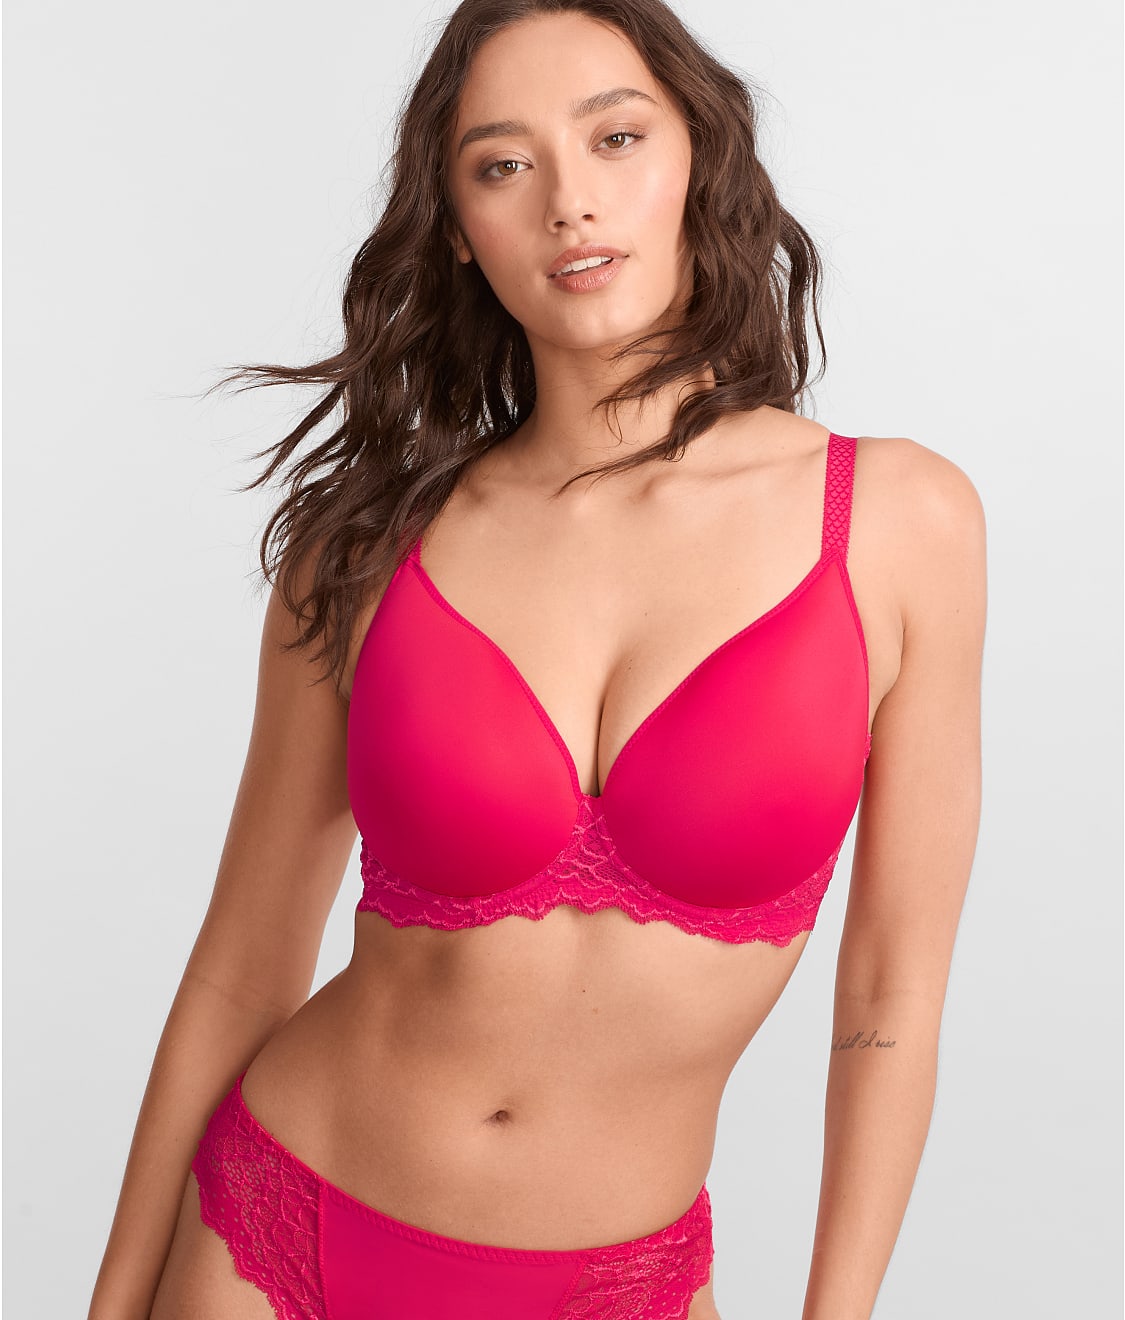 Plus Size Bra Singapore, Plus Size Lingerie, Try on in 3D